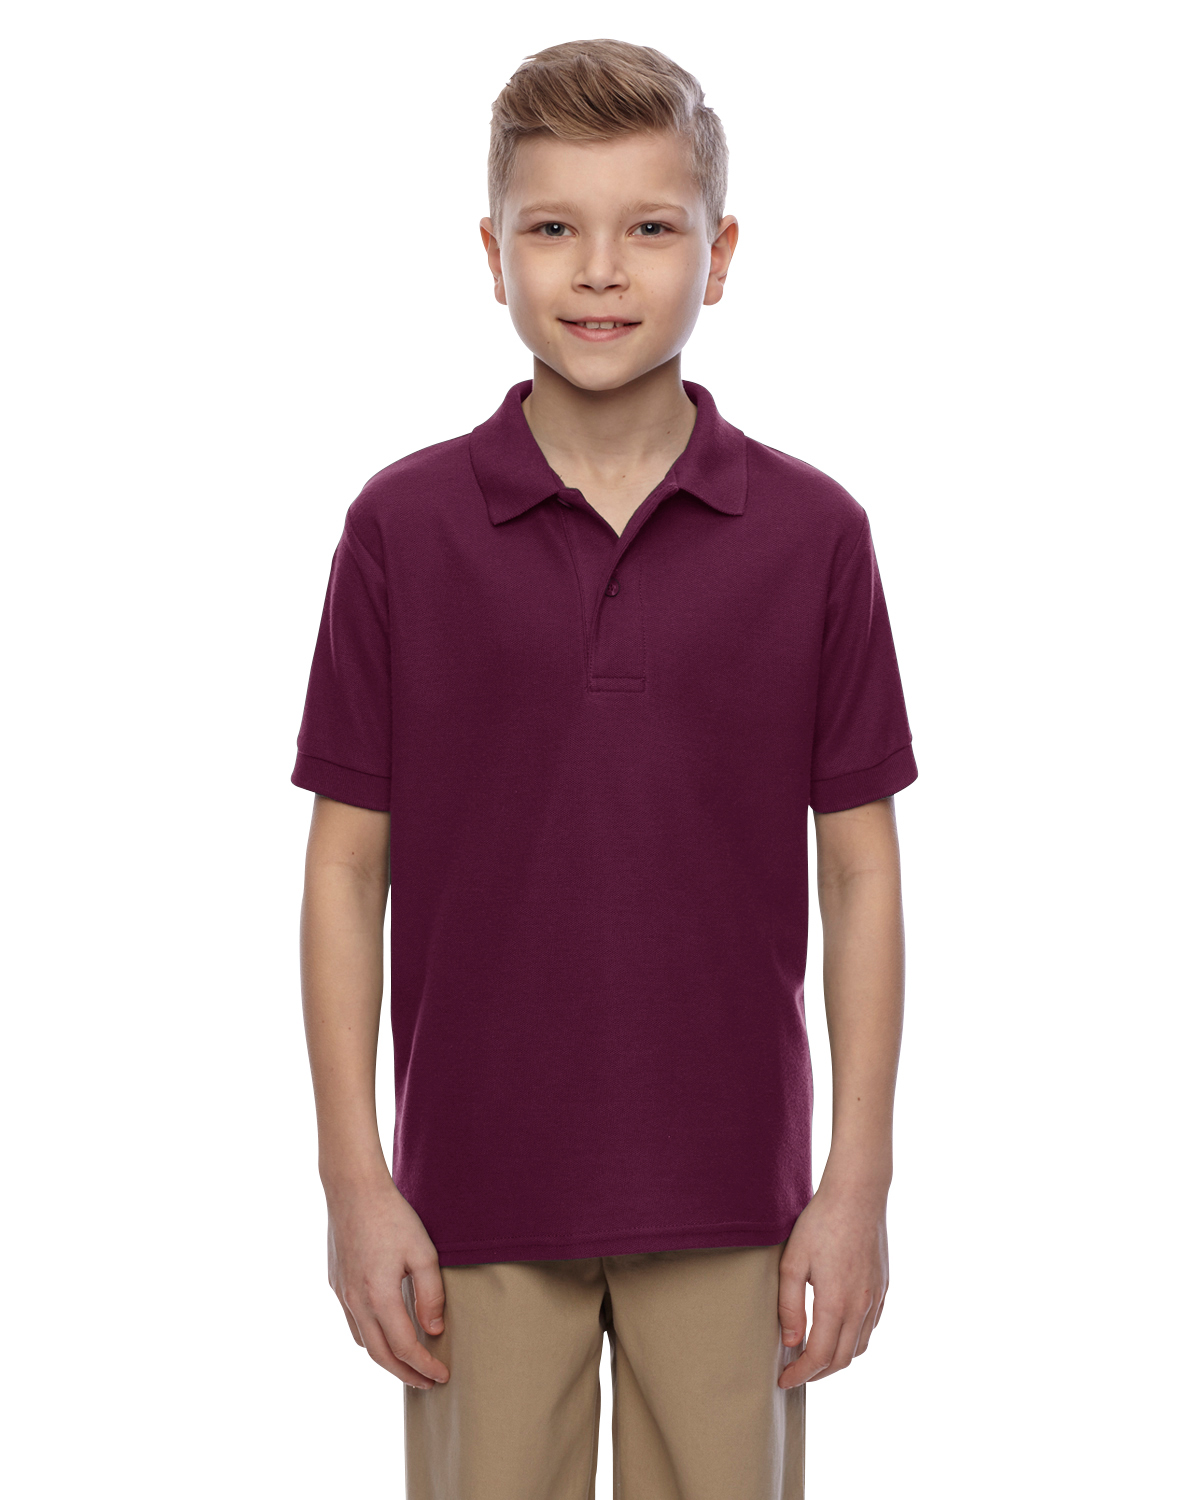 537YR  Jerzees Youth 5.3 oz. Easy Care™ Polo